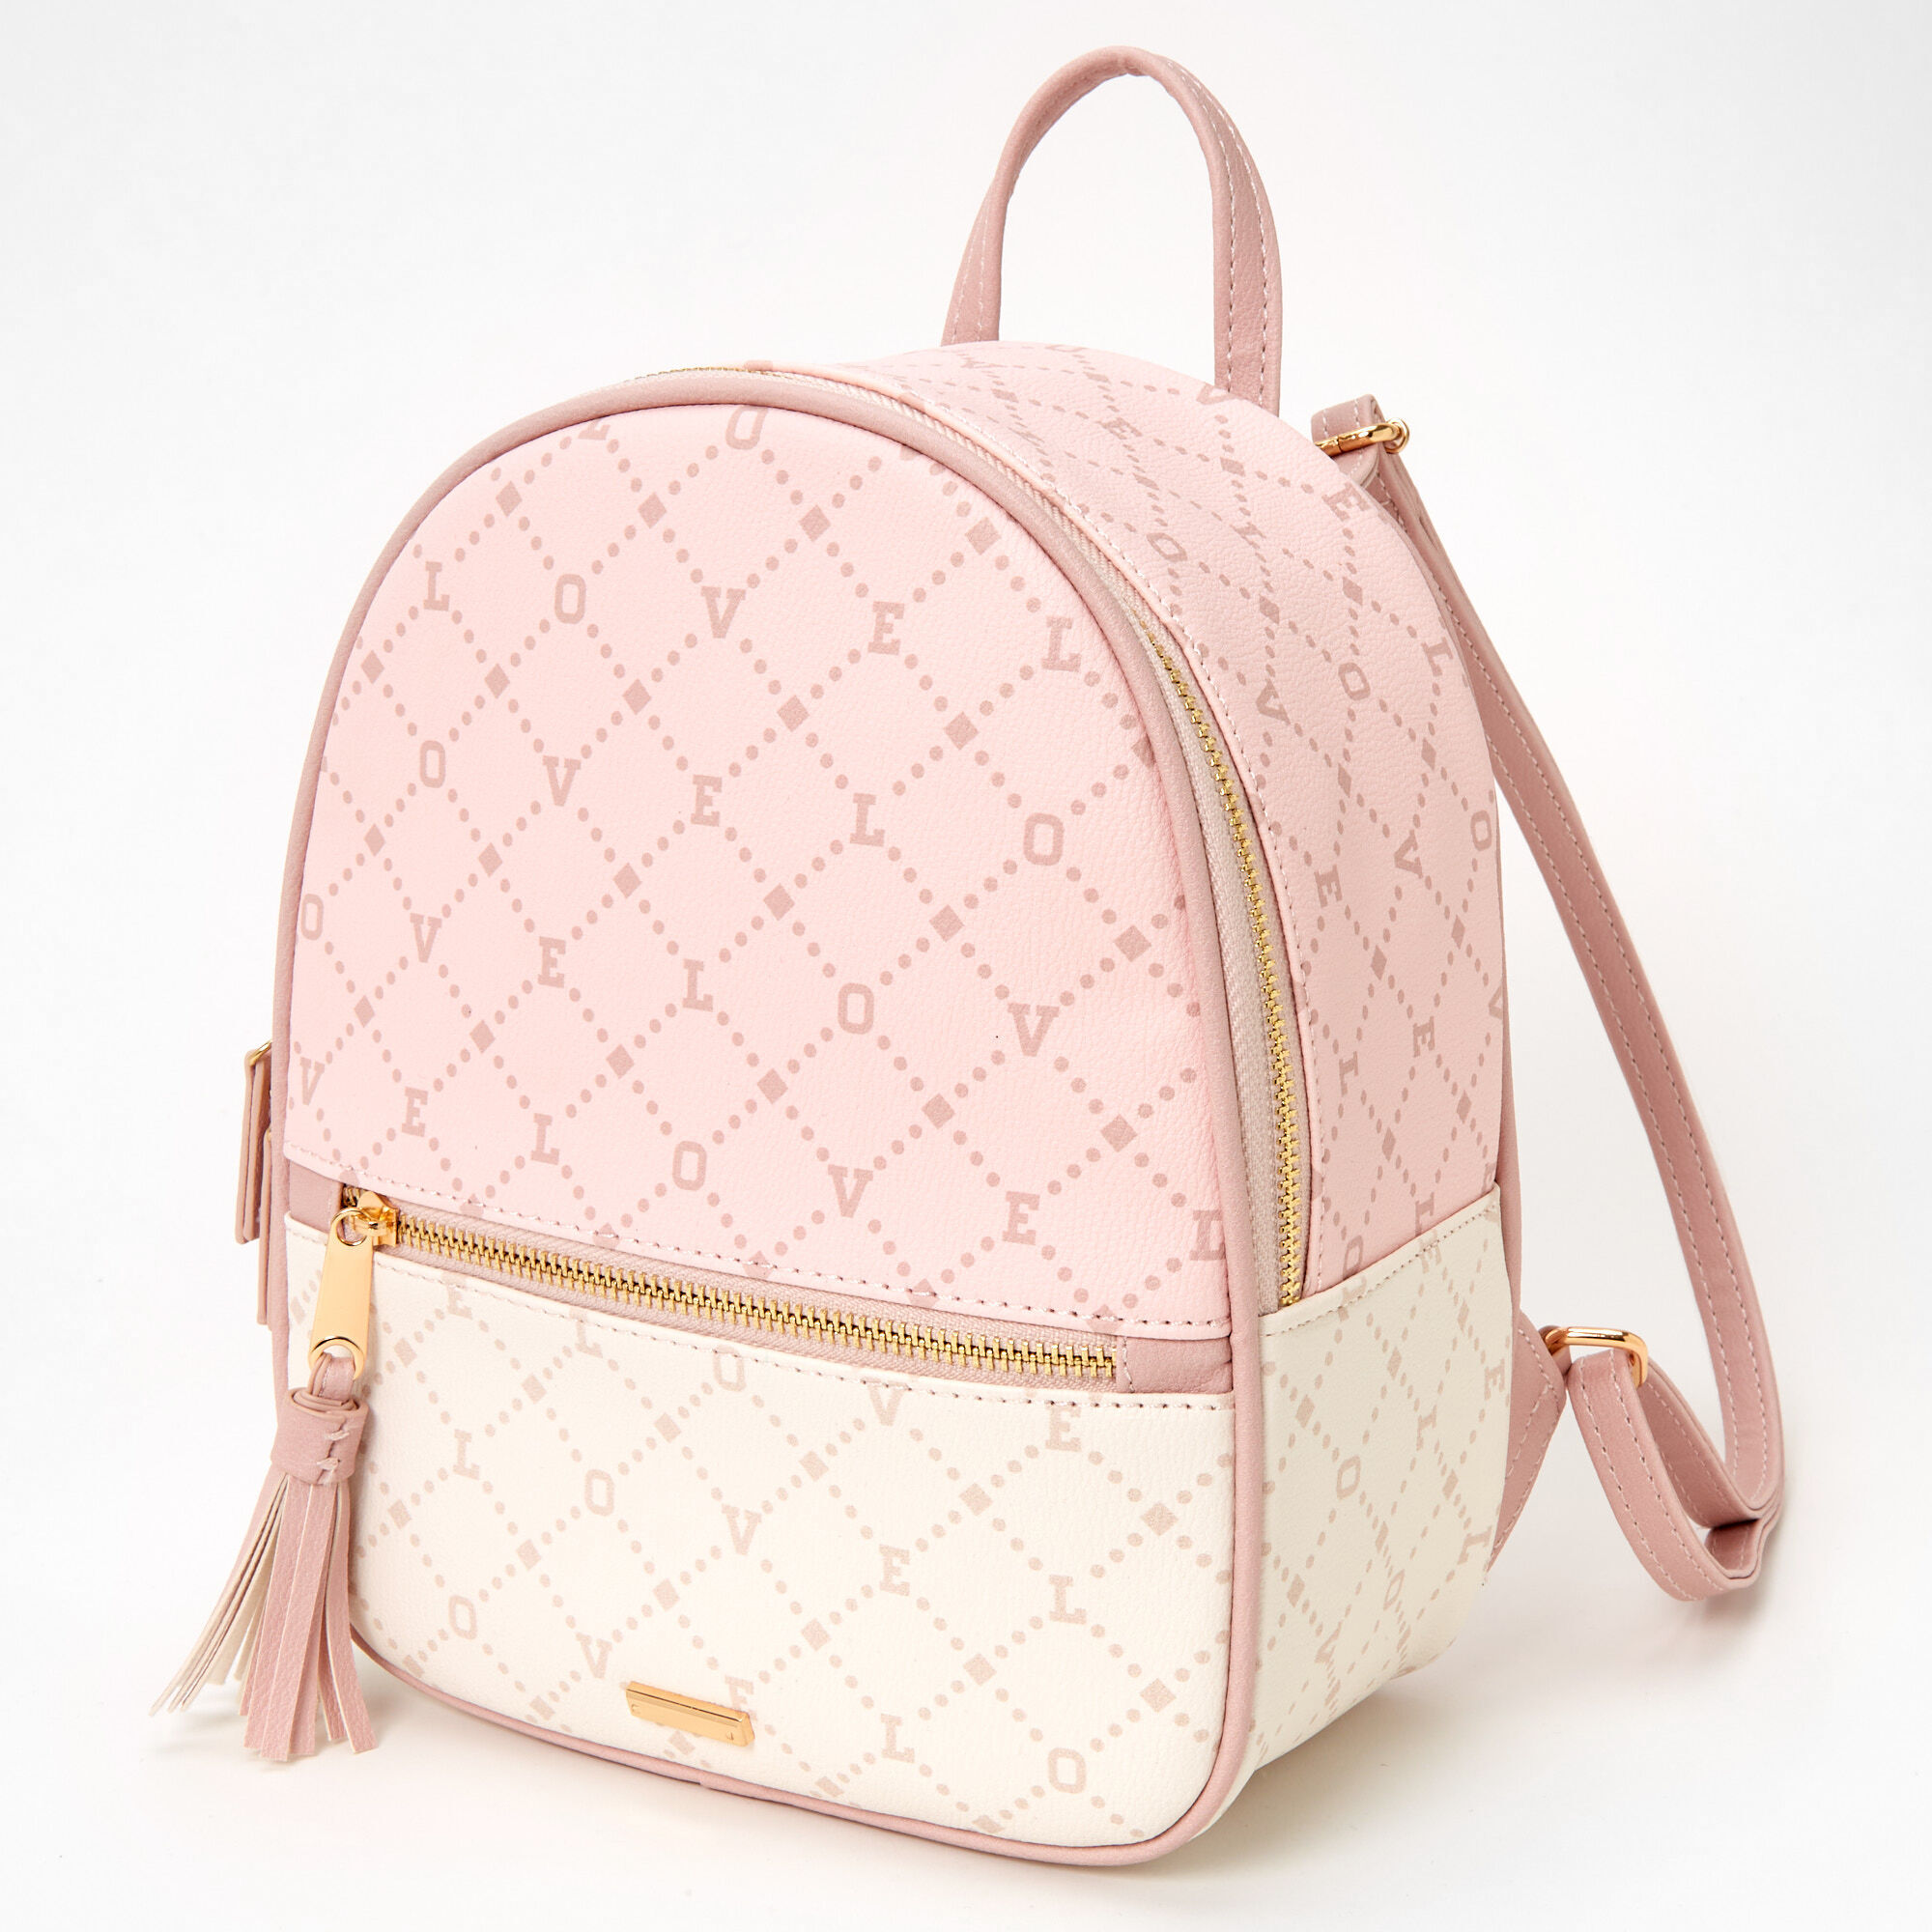 View Claires Colorblock Status Small Backpack Pink information